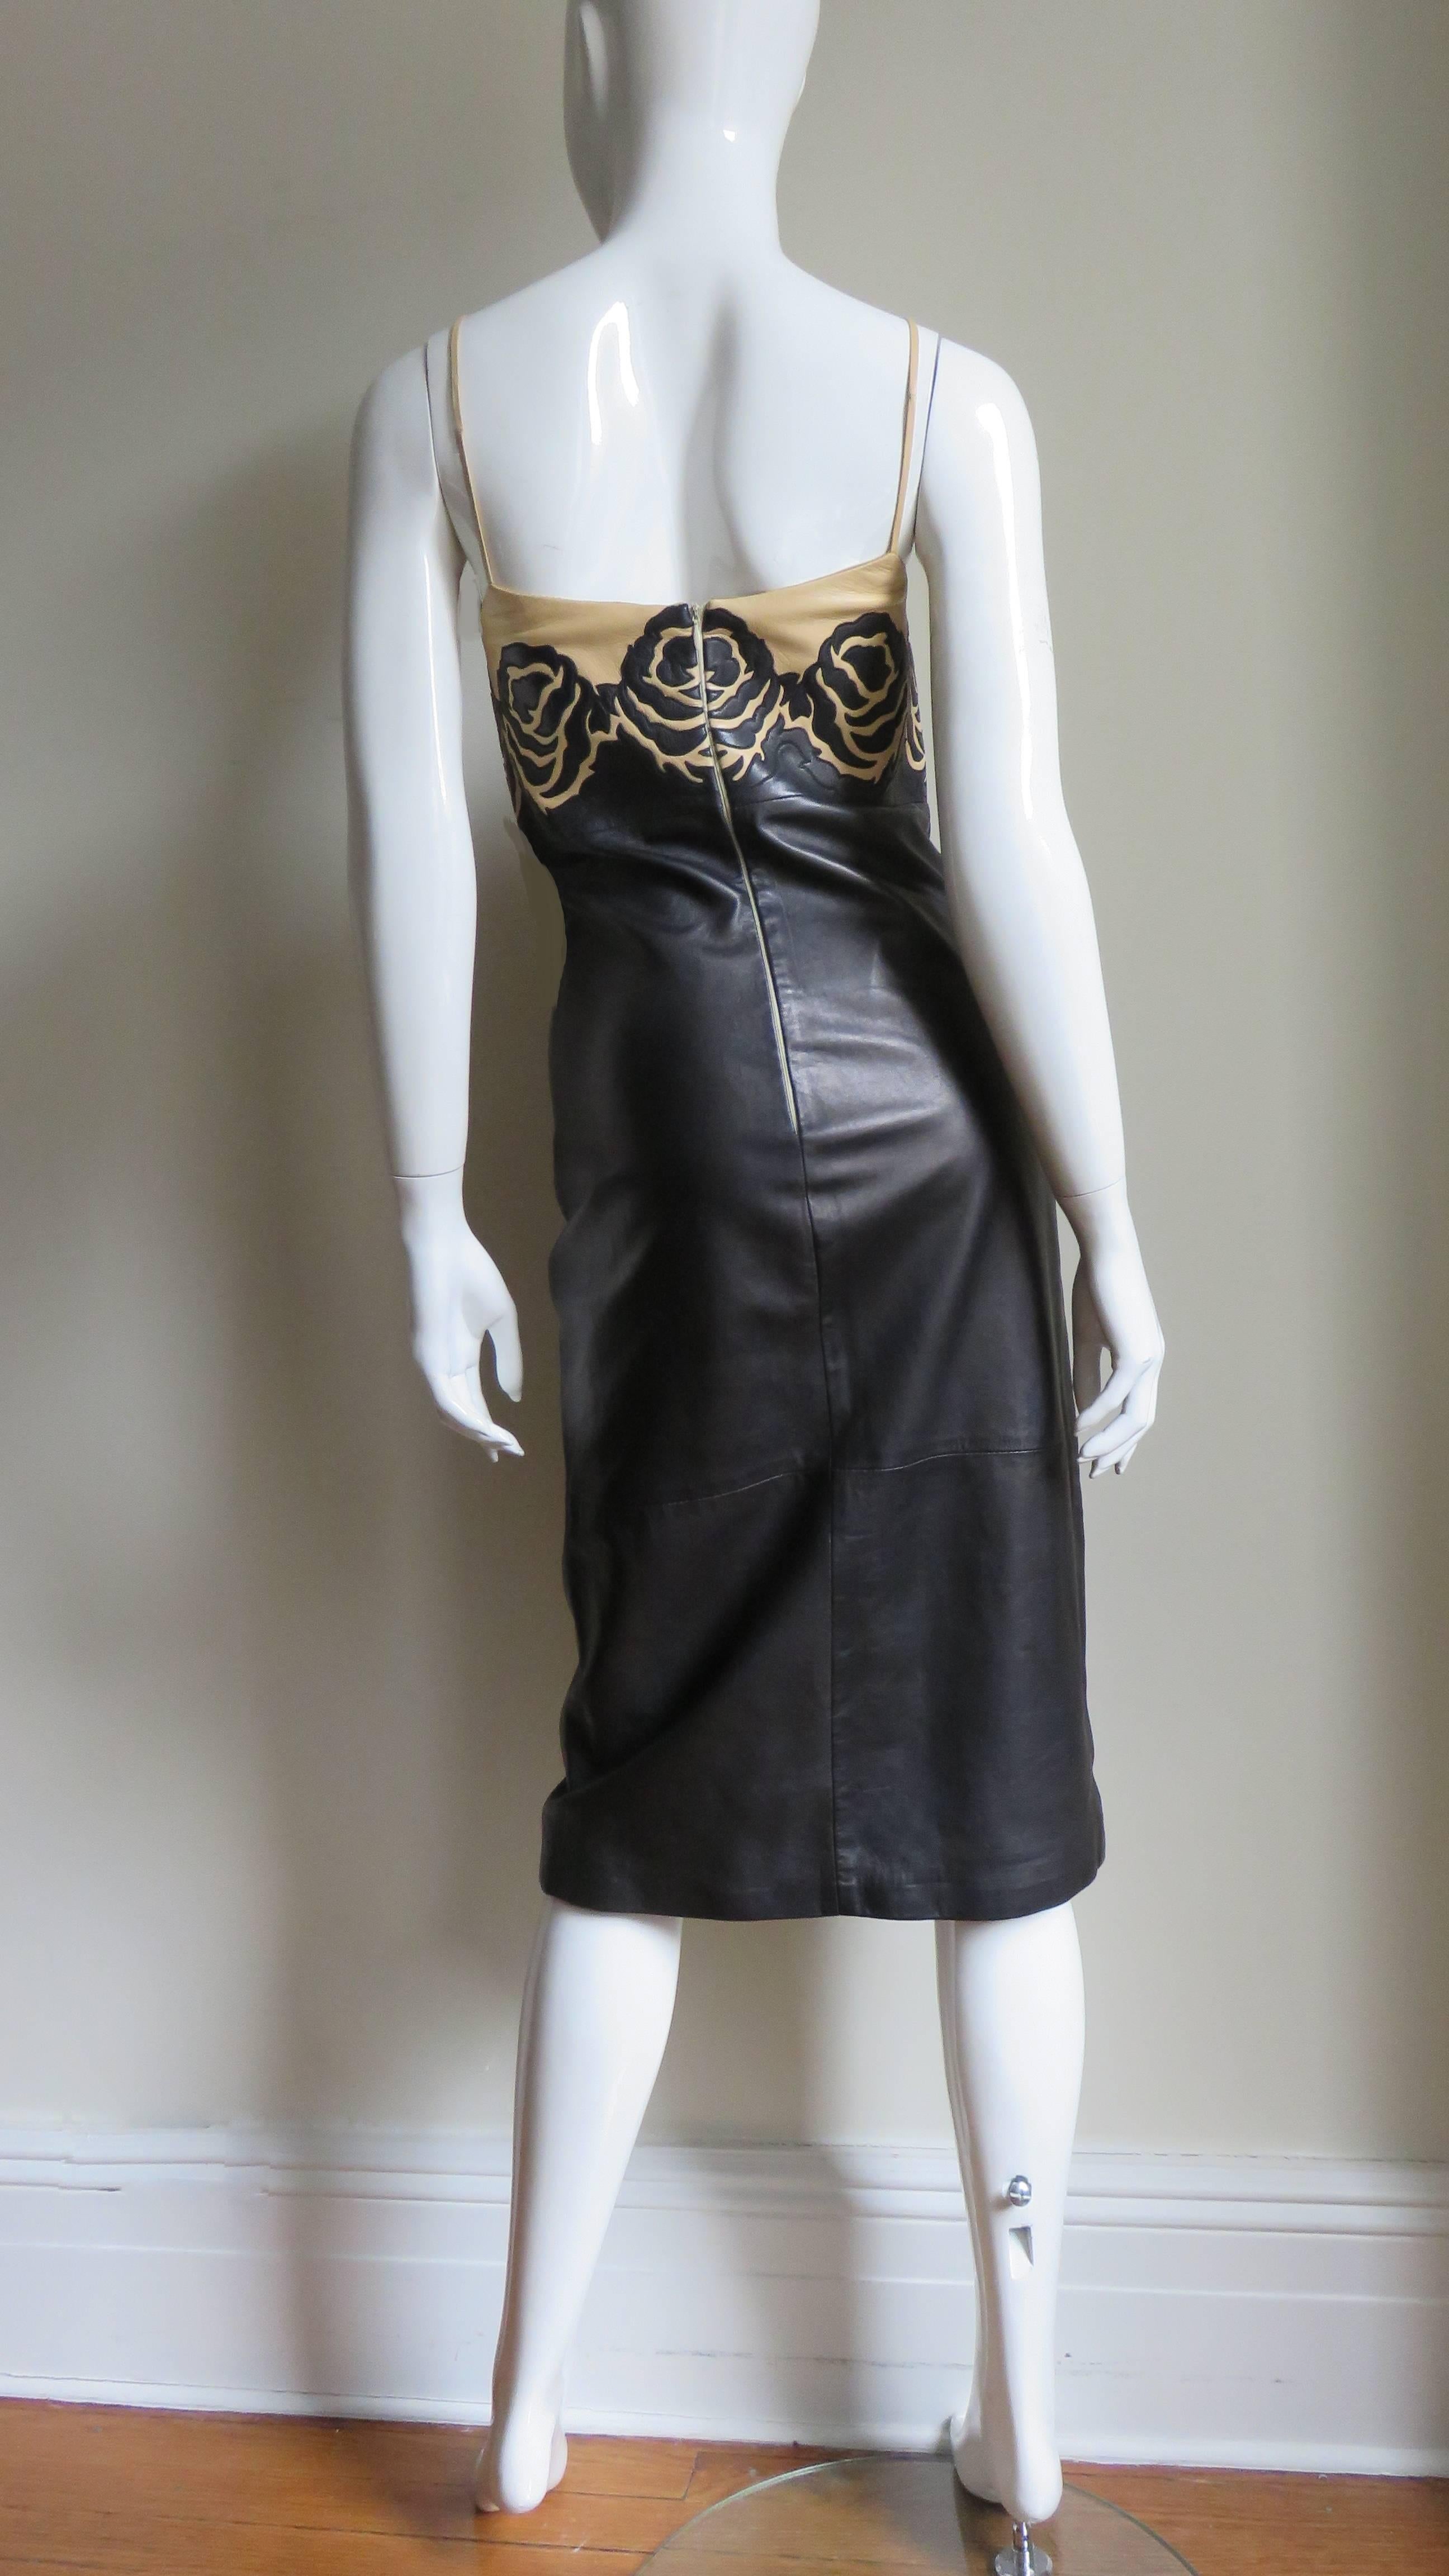  Gianni Versace Leather Color Block Dress with Applique Roses 1990s 6